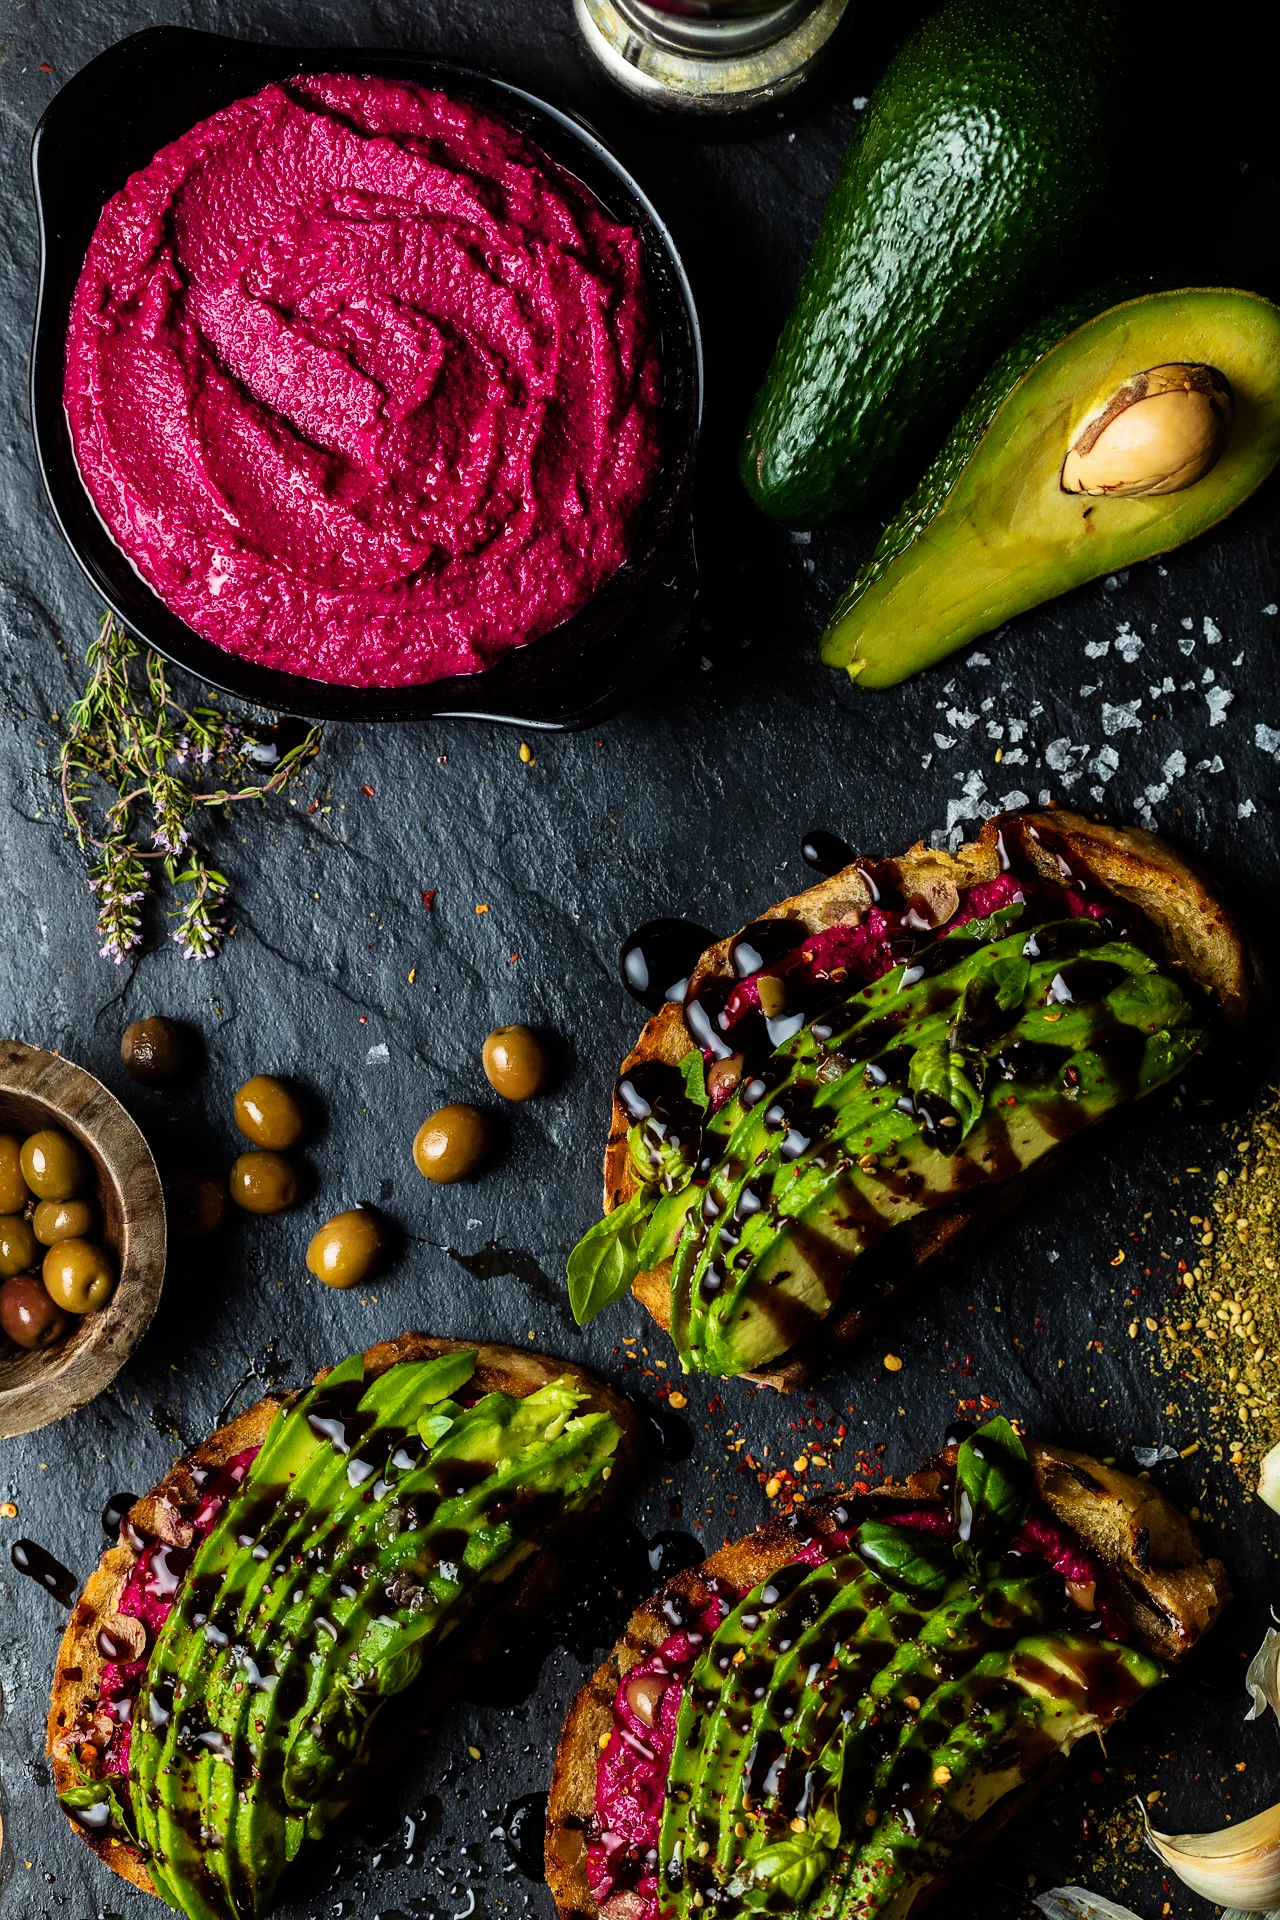 Daniel Geesen Photography - Vegan Food Photography - Diced and Spiced - Beetroot Hummus and Avocado Toast